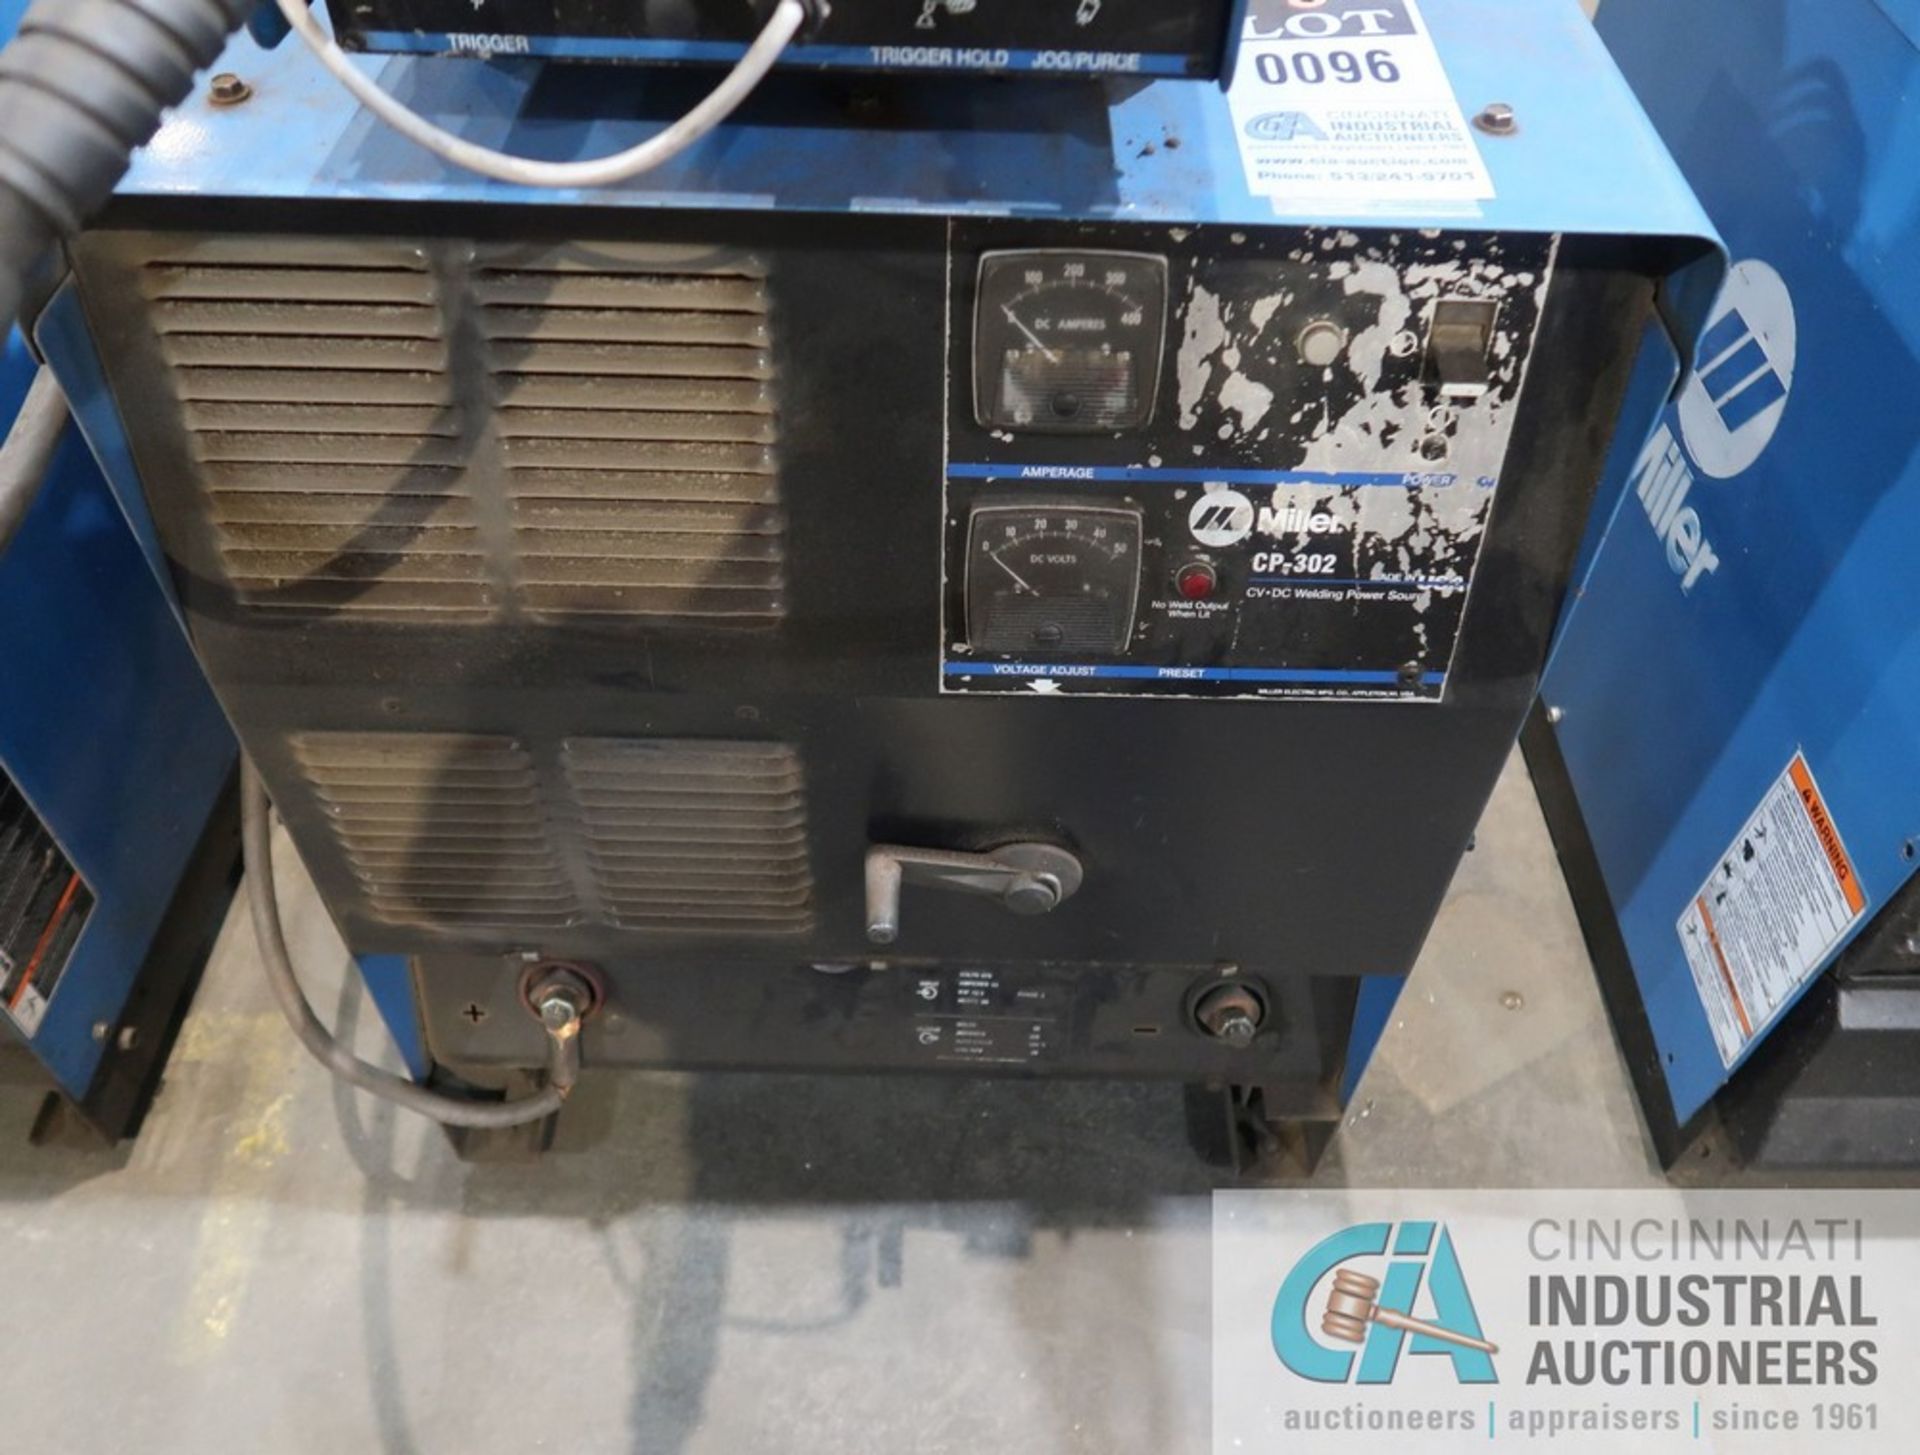 300 AMP MILLER CP-302 CV-DC WELDING POWER SOURCE; S/N LC666631, WITH MILLER 22A 24 VOLT WIRE FEEDER - Image 3 of 6